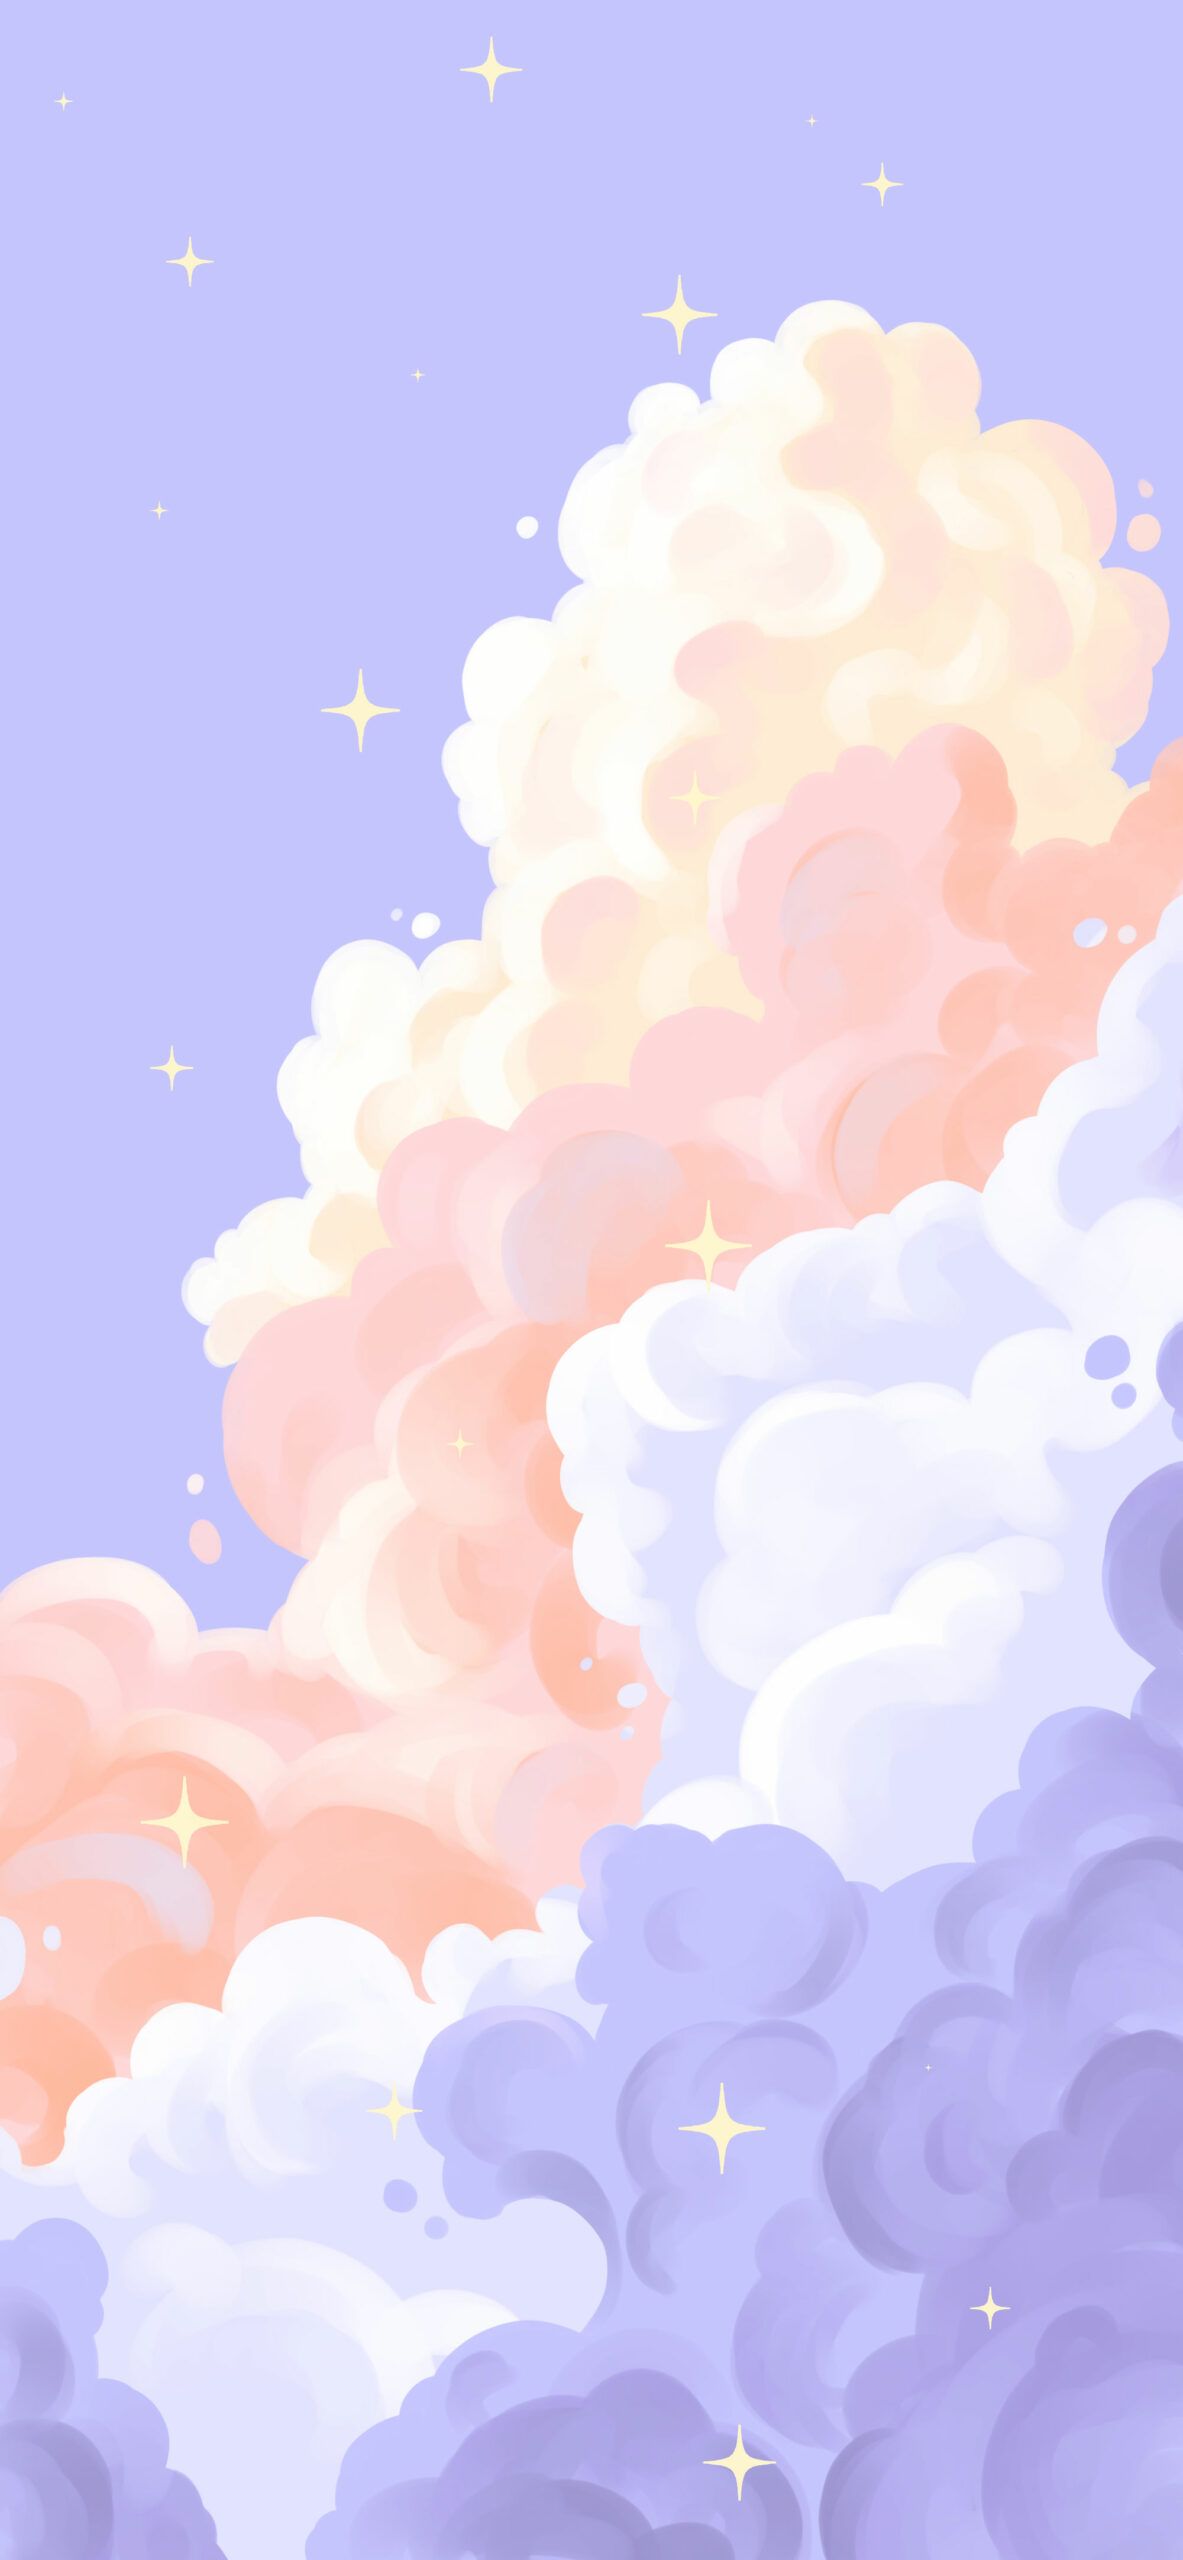 A sky with clouds and stars in it - Cloud